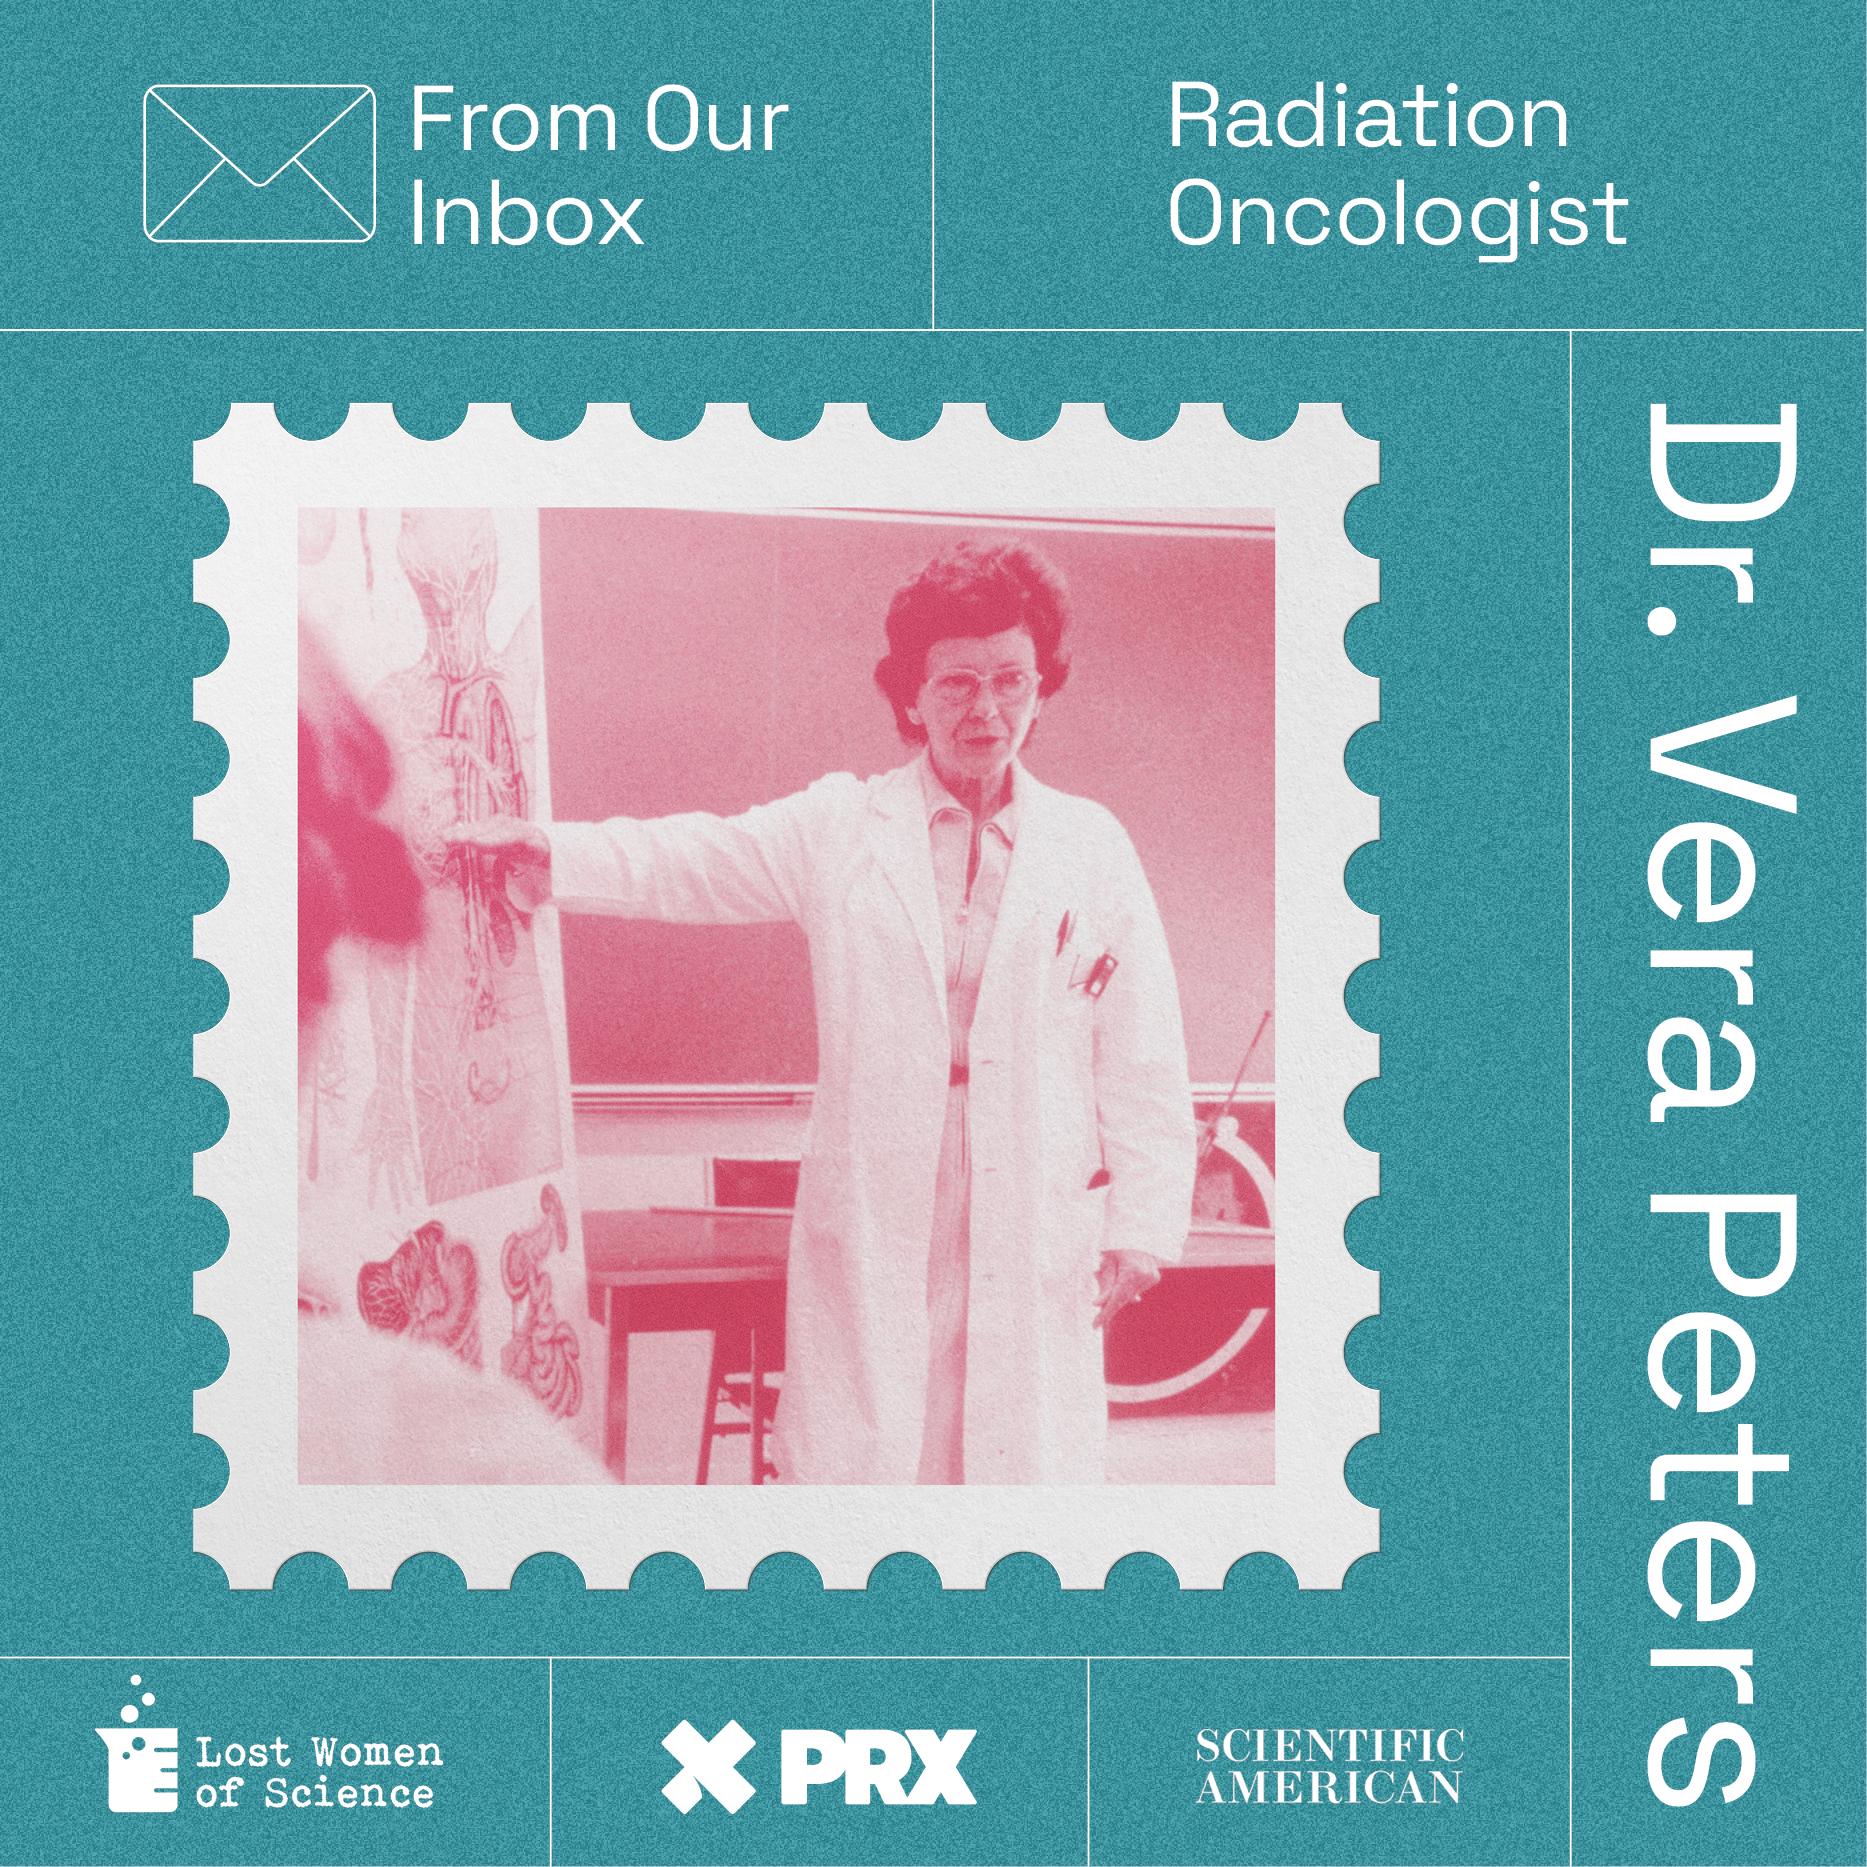 Thumbnail for "From Our Inbox: Vera Peters - The Doctor Who Helped Spare Women From Radical Mastectomy".